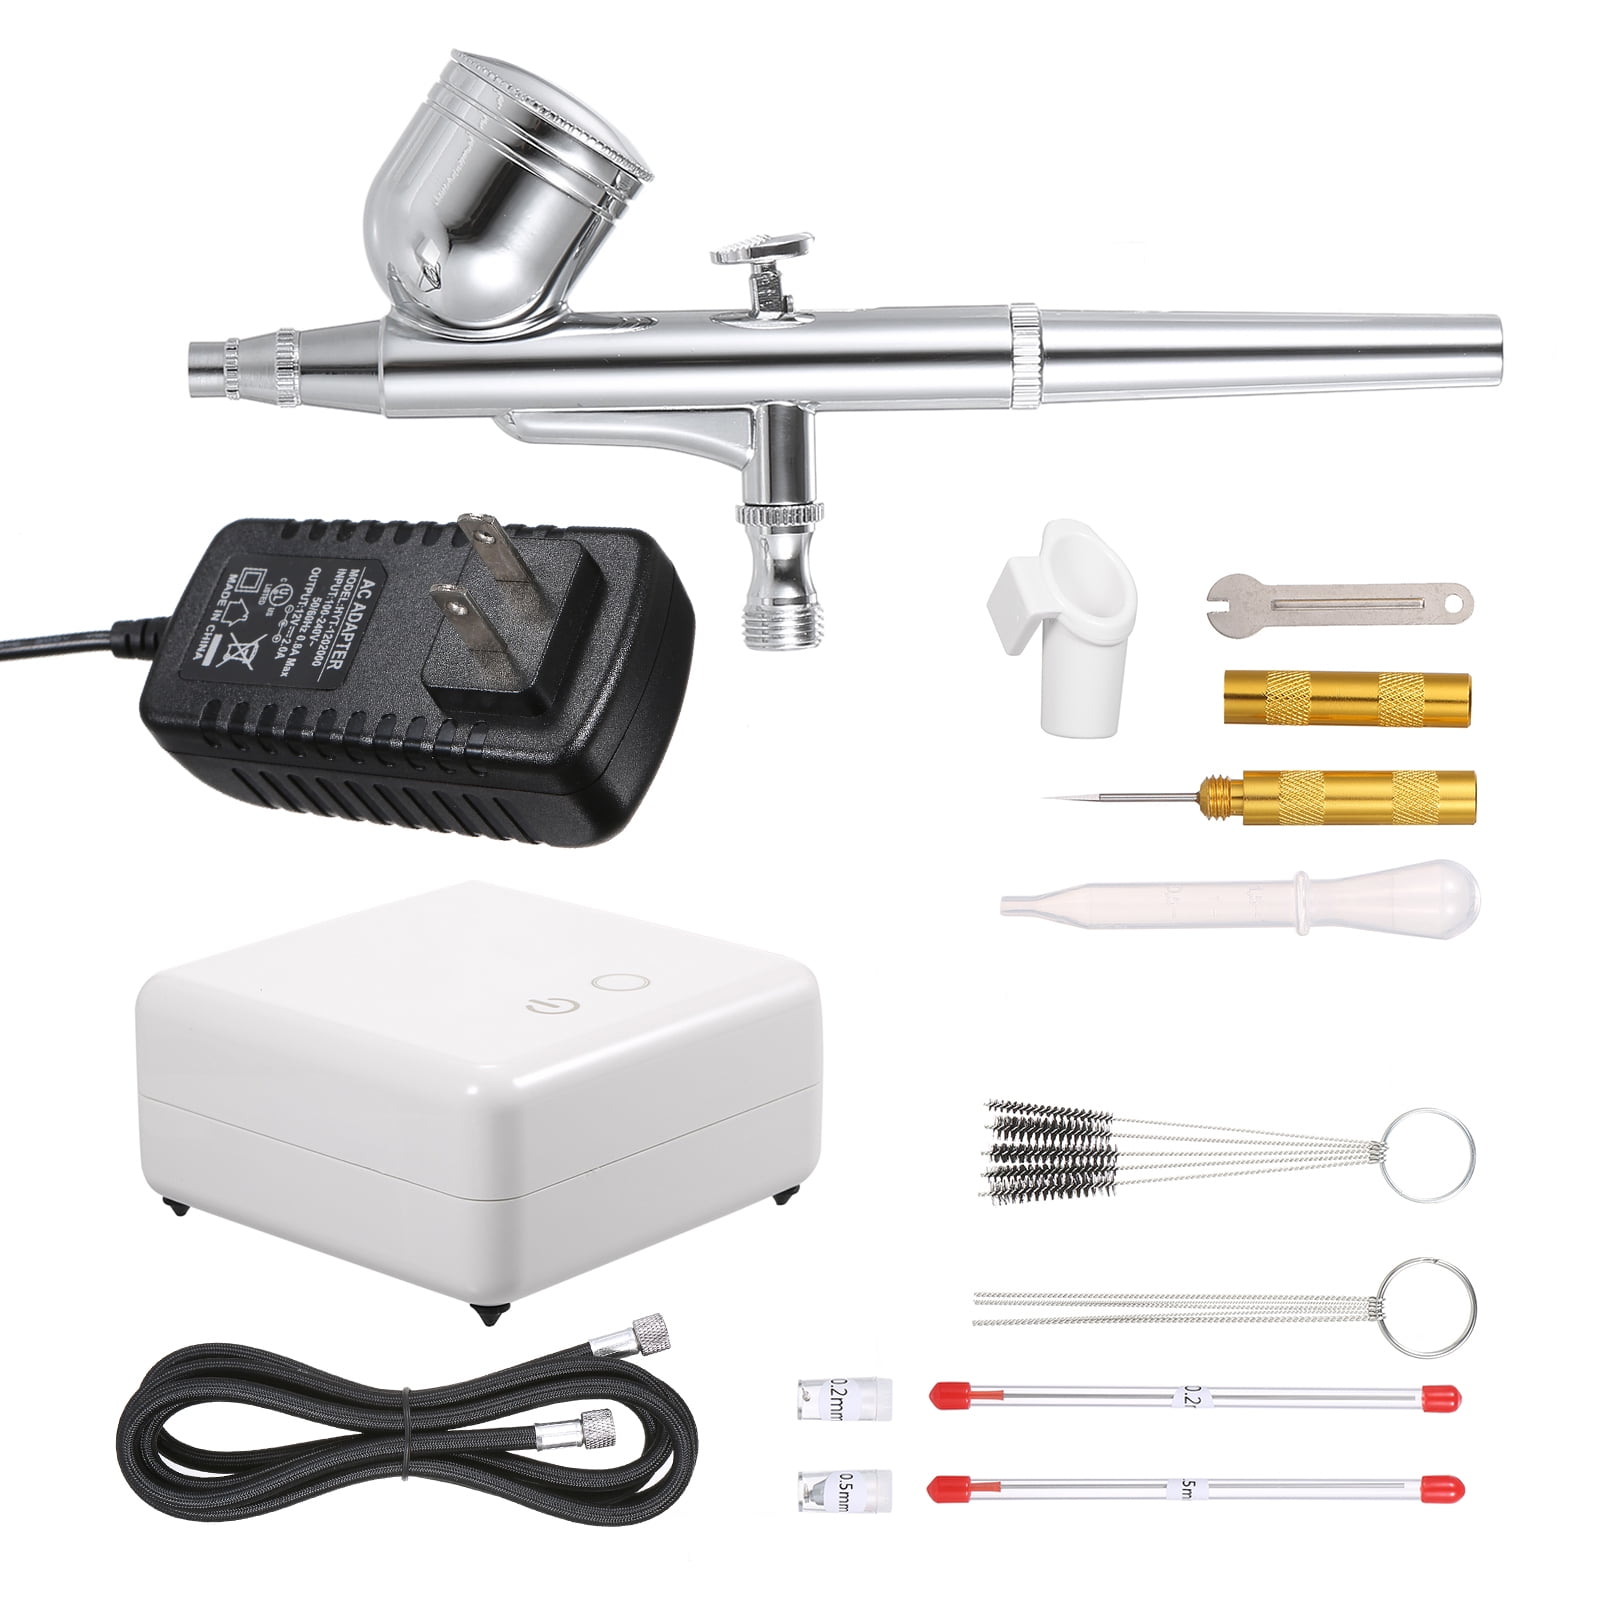 Multi-Purpose Airbrush kit with Compressor, Portable Mini Air Compressor  Gravity Feed Airbrush Set for Makeup,Cake Decorating, Nail Art,Painting